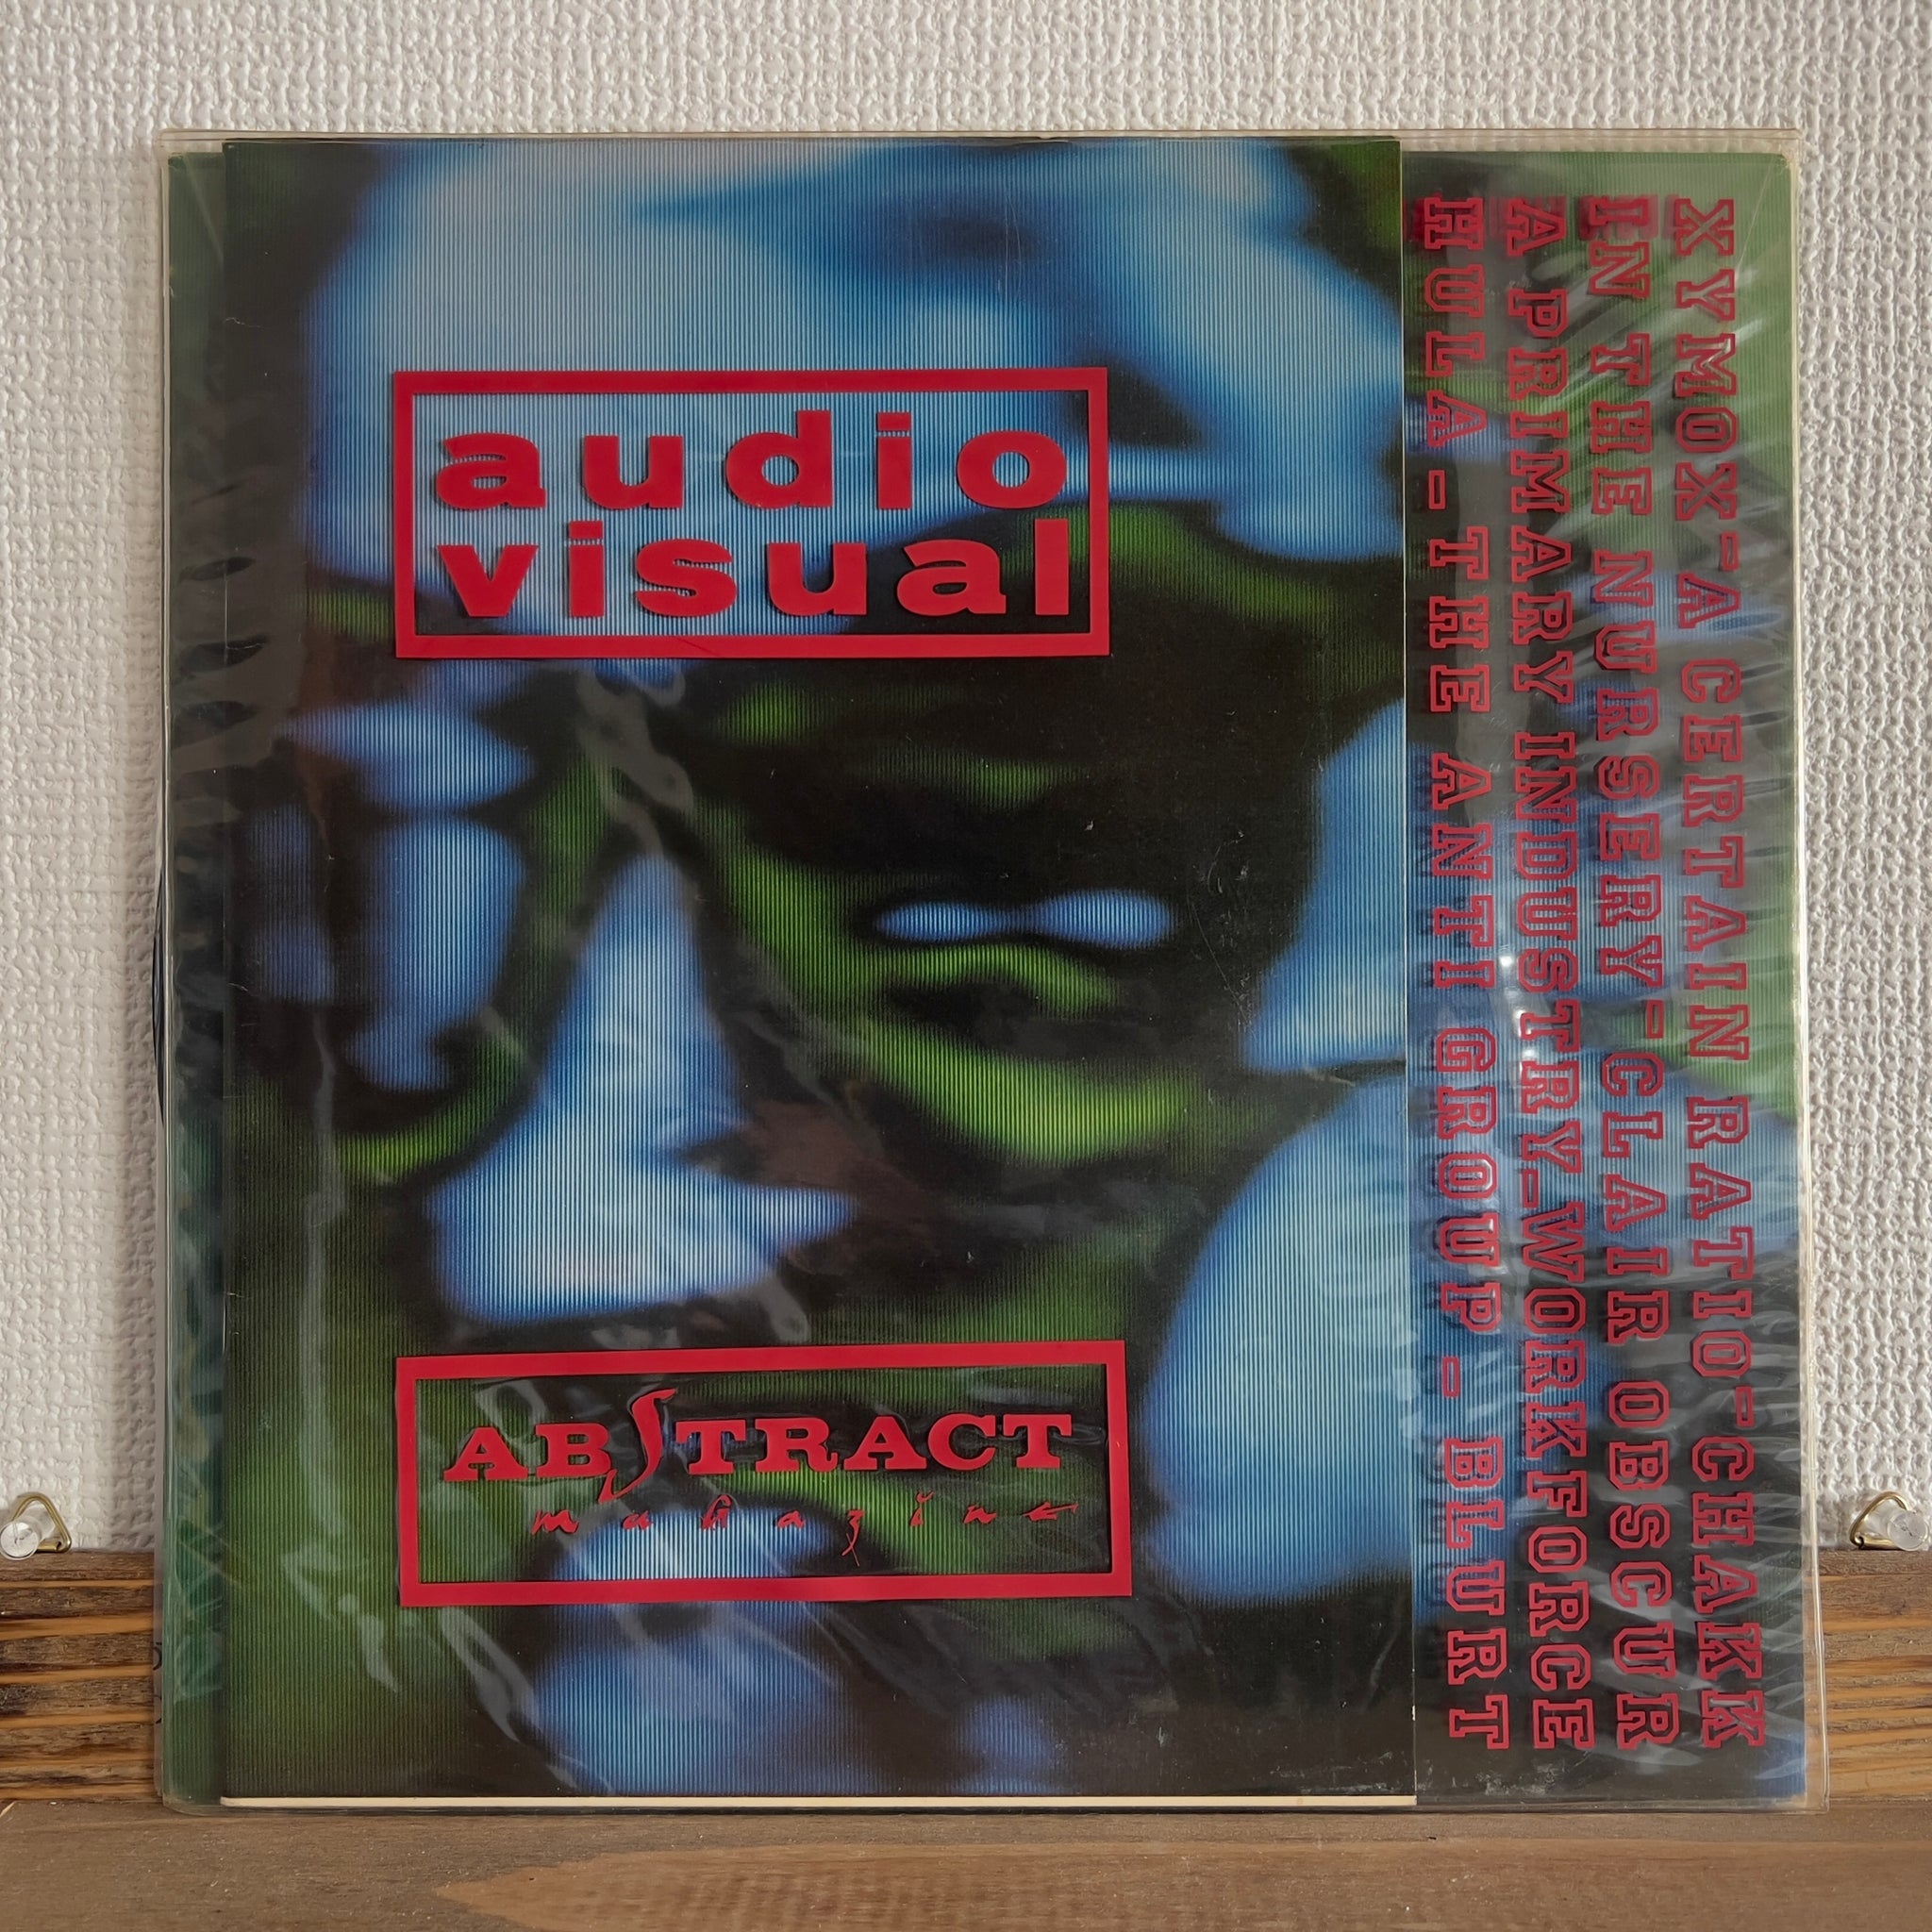 Abstract Magazine Issue 6 - Audio Visual